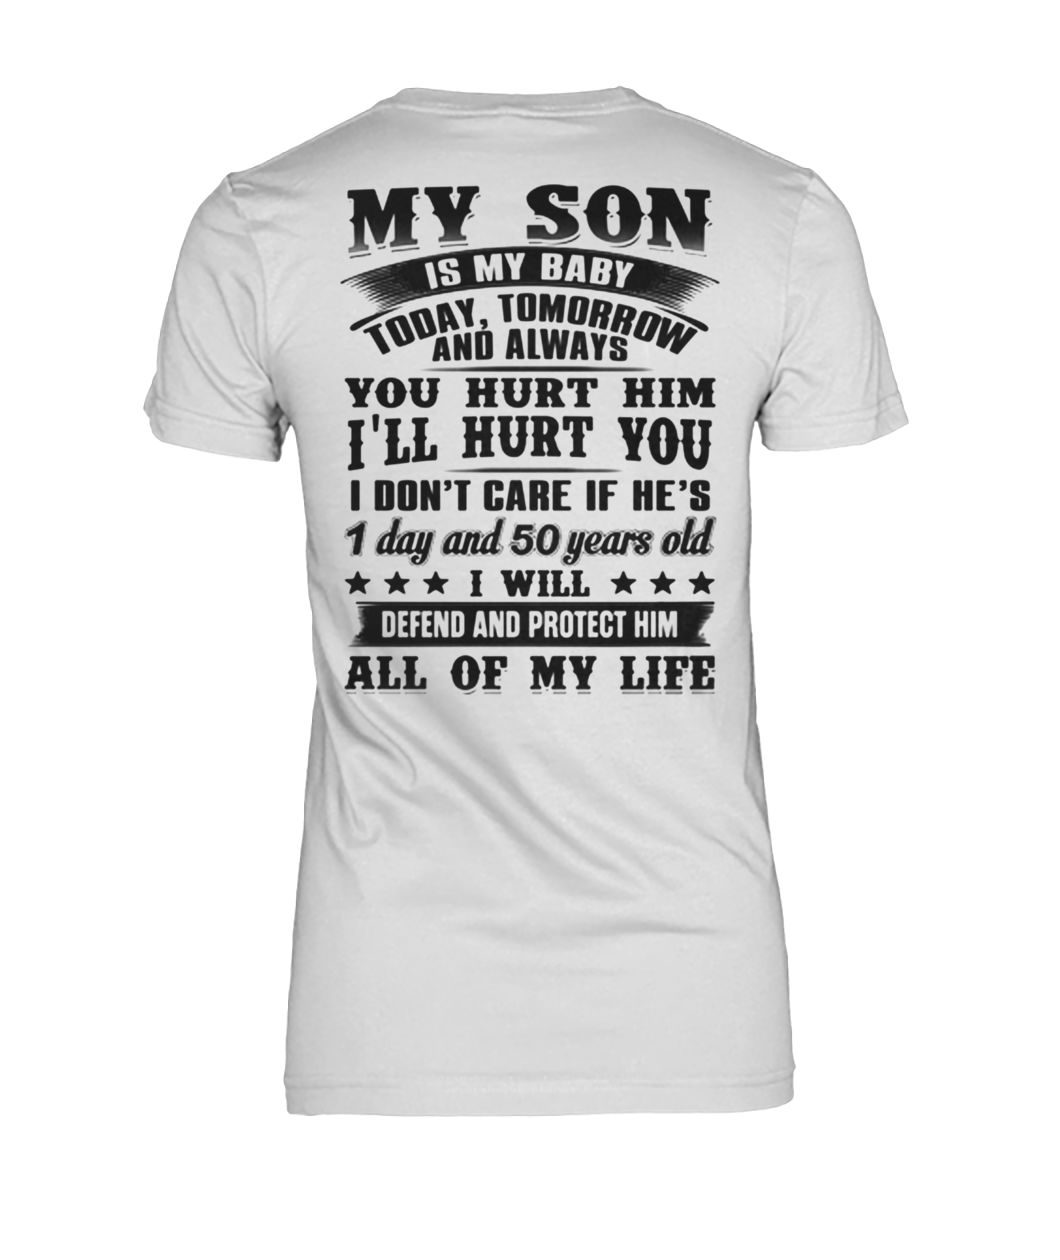 My son is my baby today tomorrow and always you hurt him I'll hurt you women's crew tee